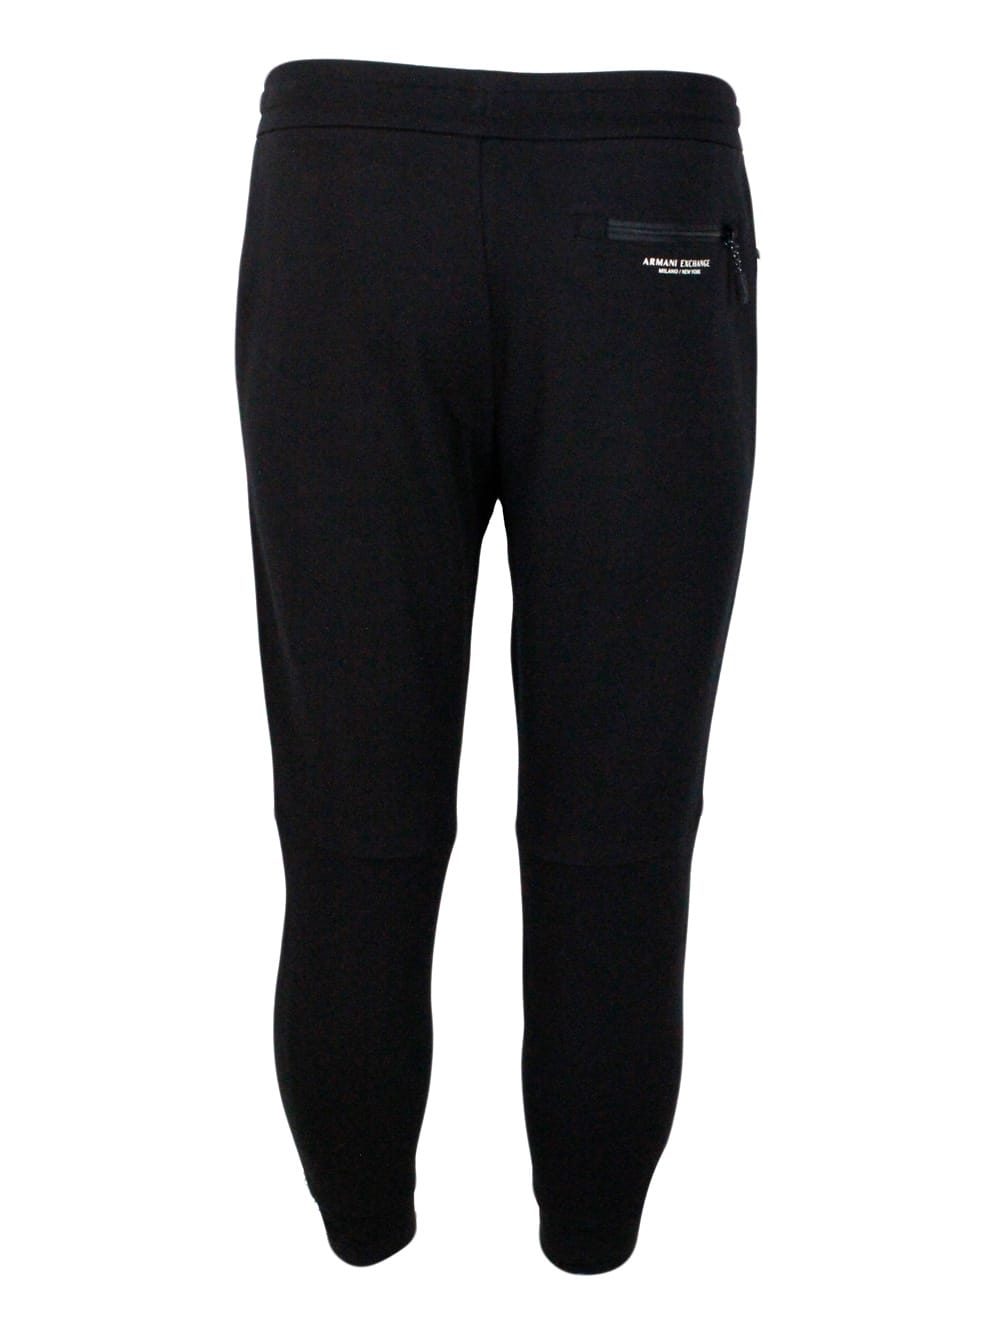 Shop Armani Collezioni Cotton Fleece Jogging Trousers With Drawstring At The Waist And Cuff At The Bottom In Black